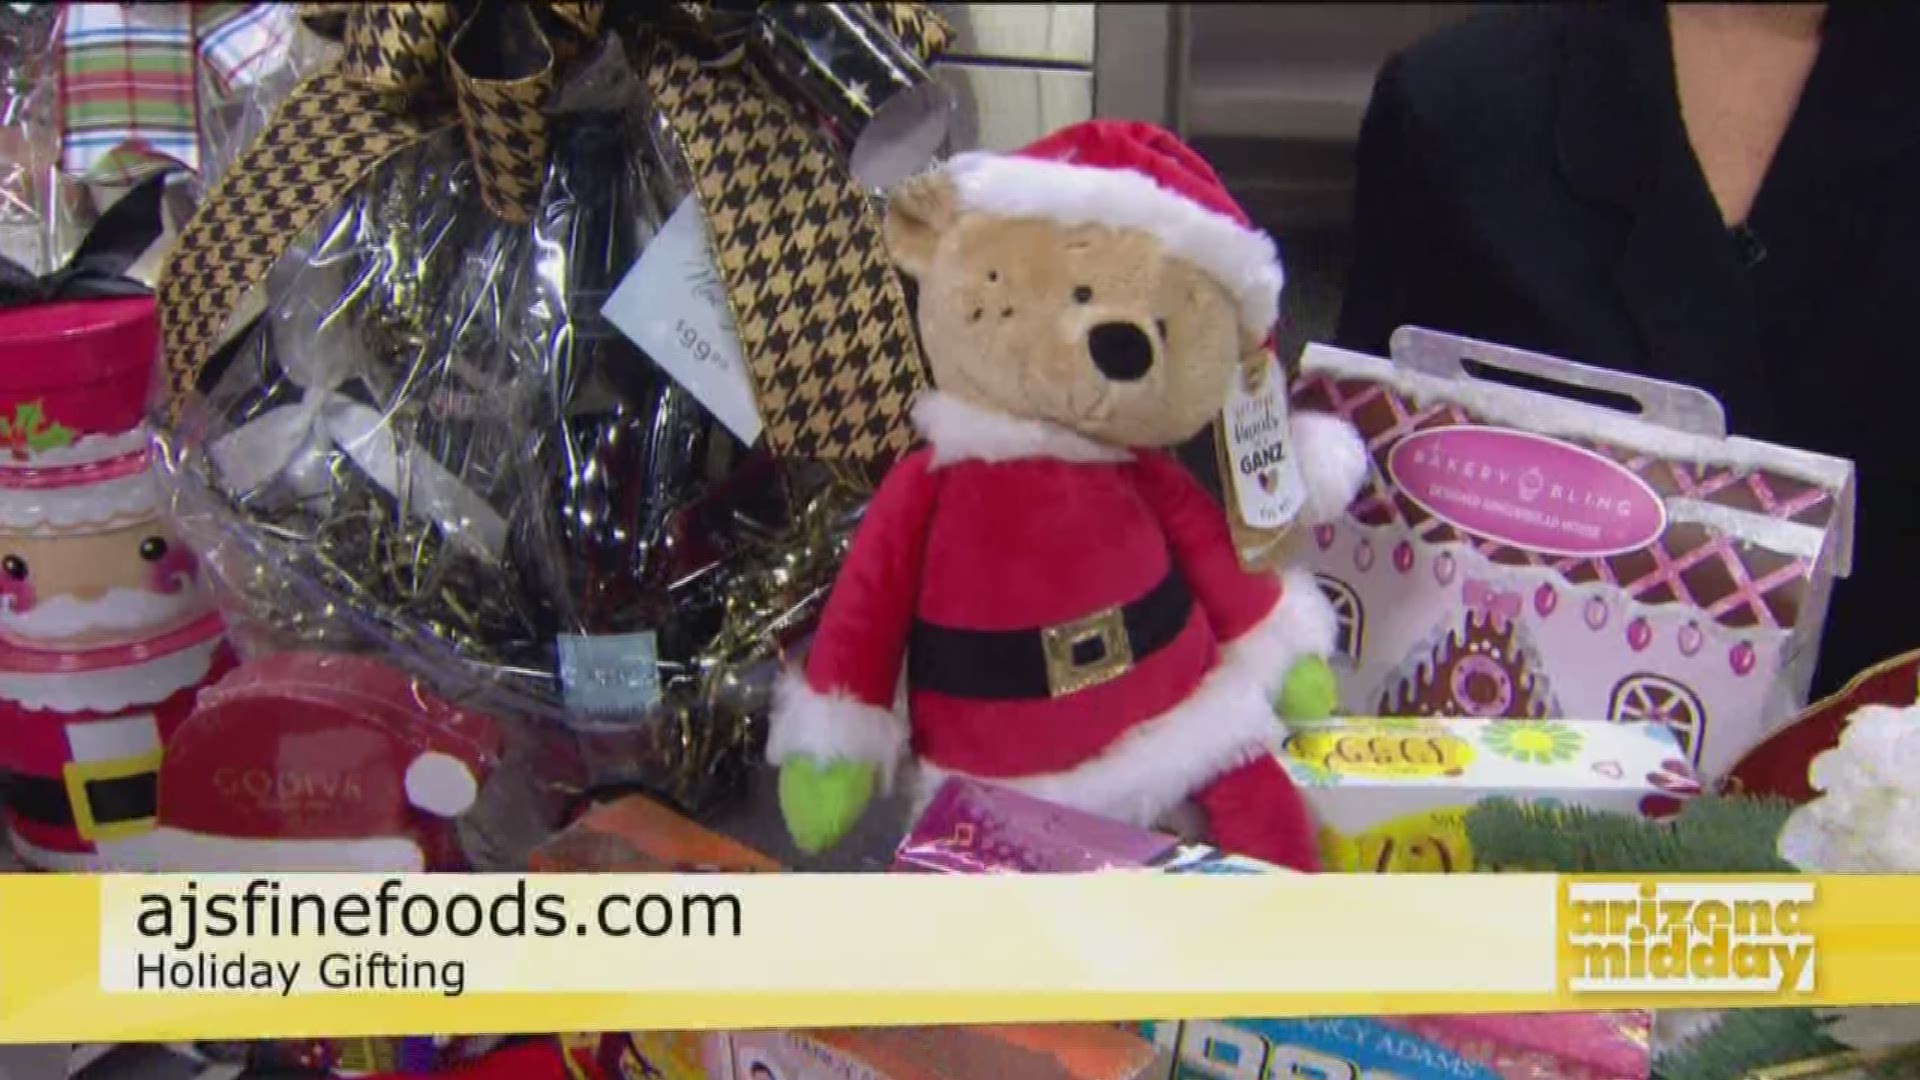 David McCormick shows us how AJ's Fine Foods make gift giving easy with selections of gift baskets, hostess gifts and more!